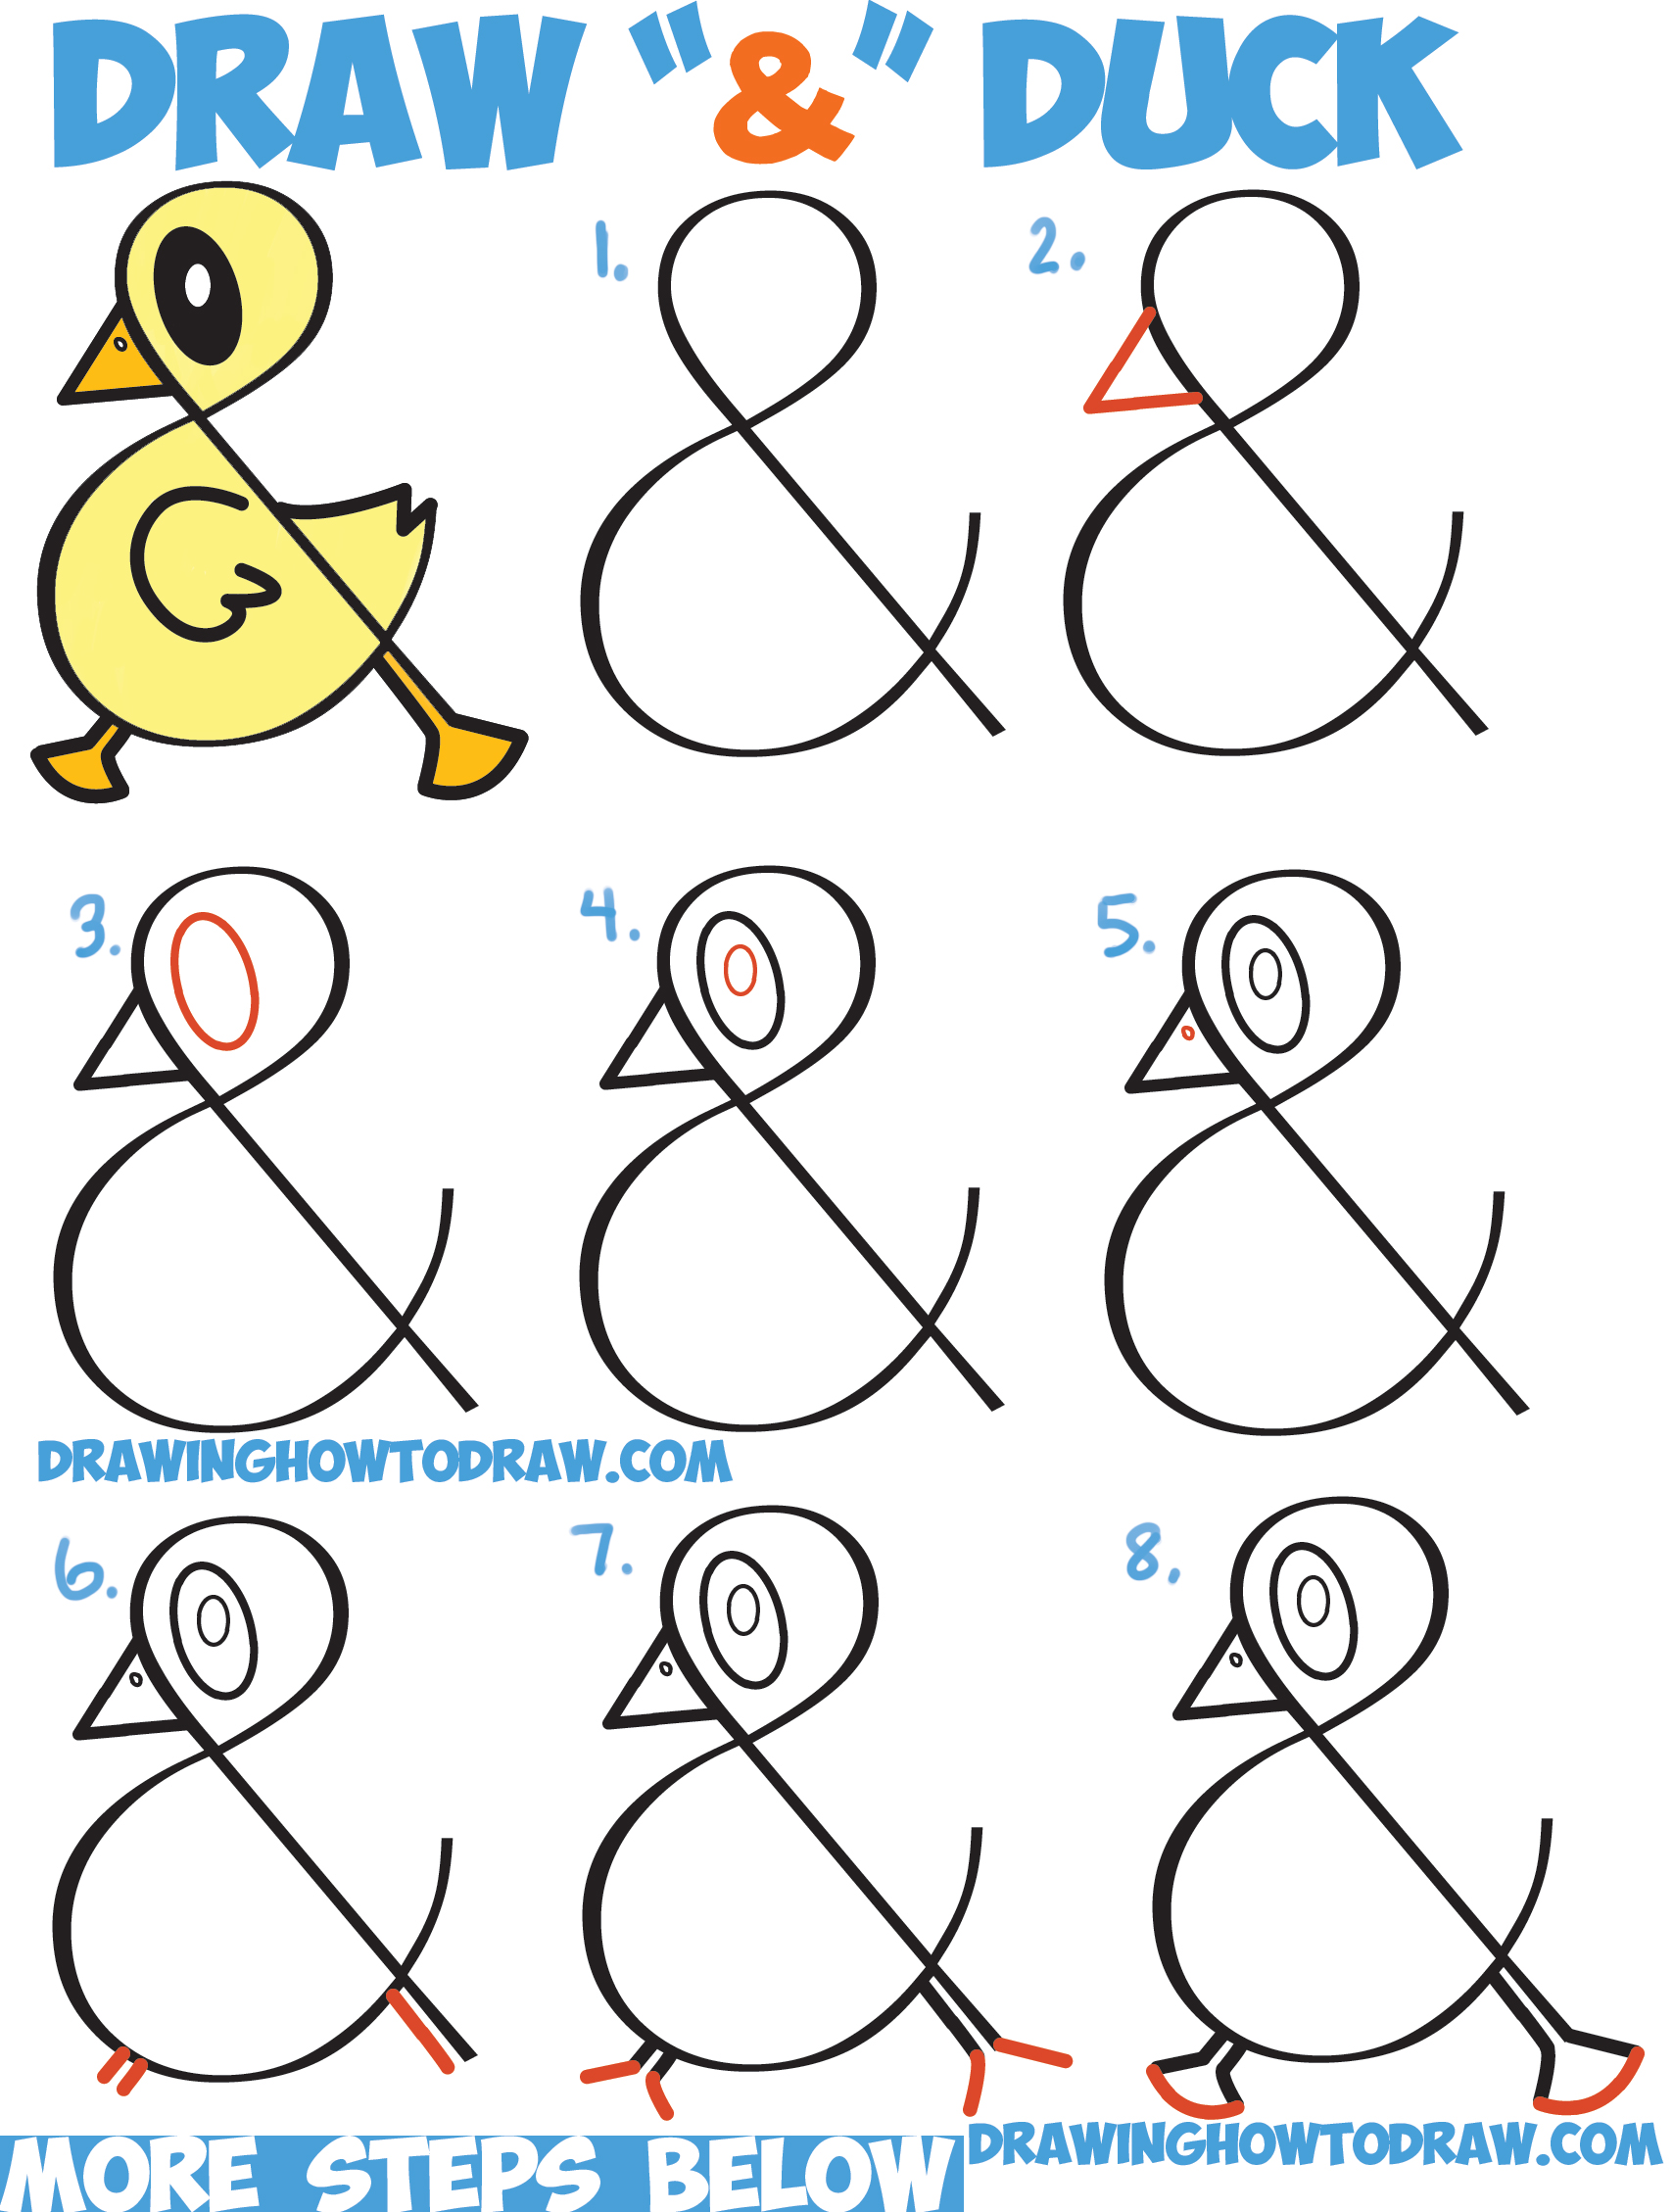 How to Draw a Cute Cartoon Duck from Ampersand Symbol Easy Step by